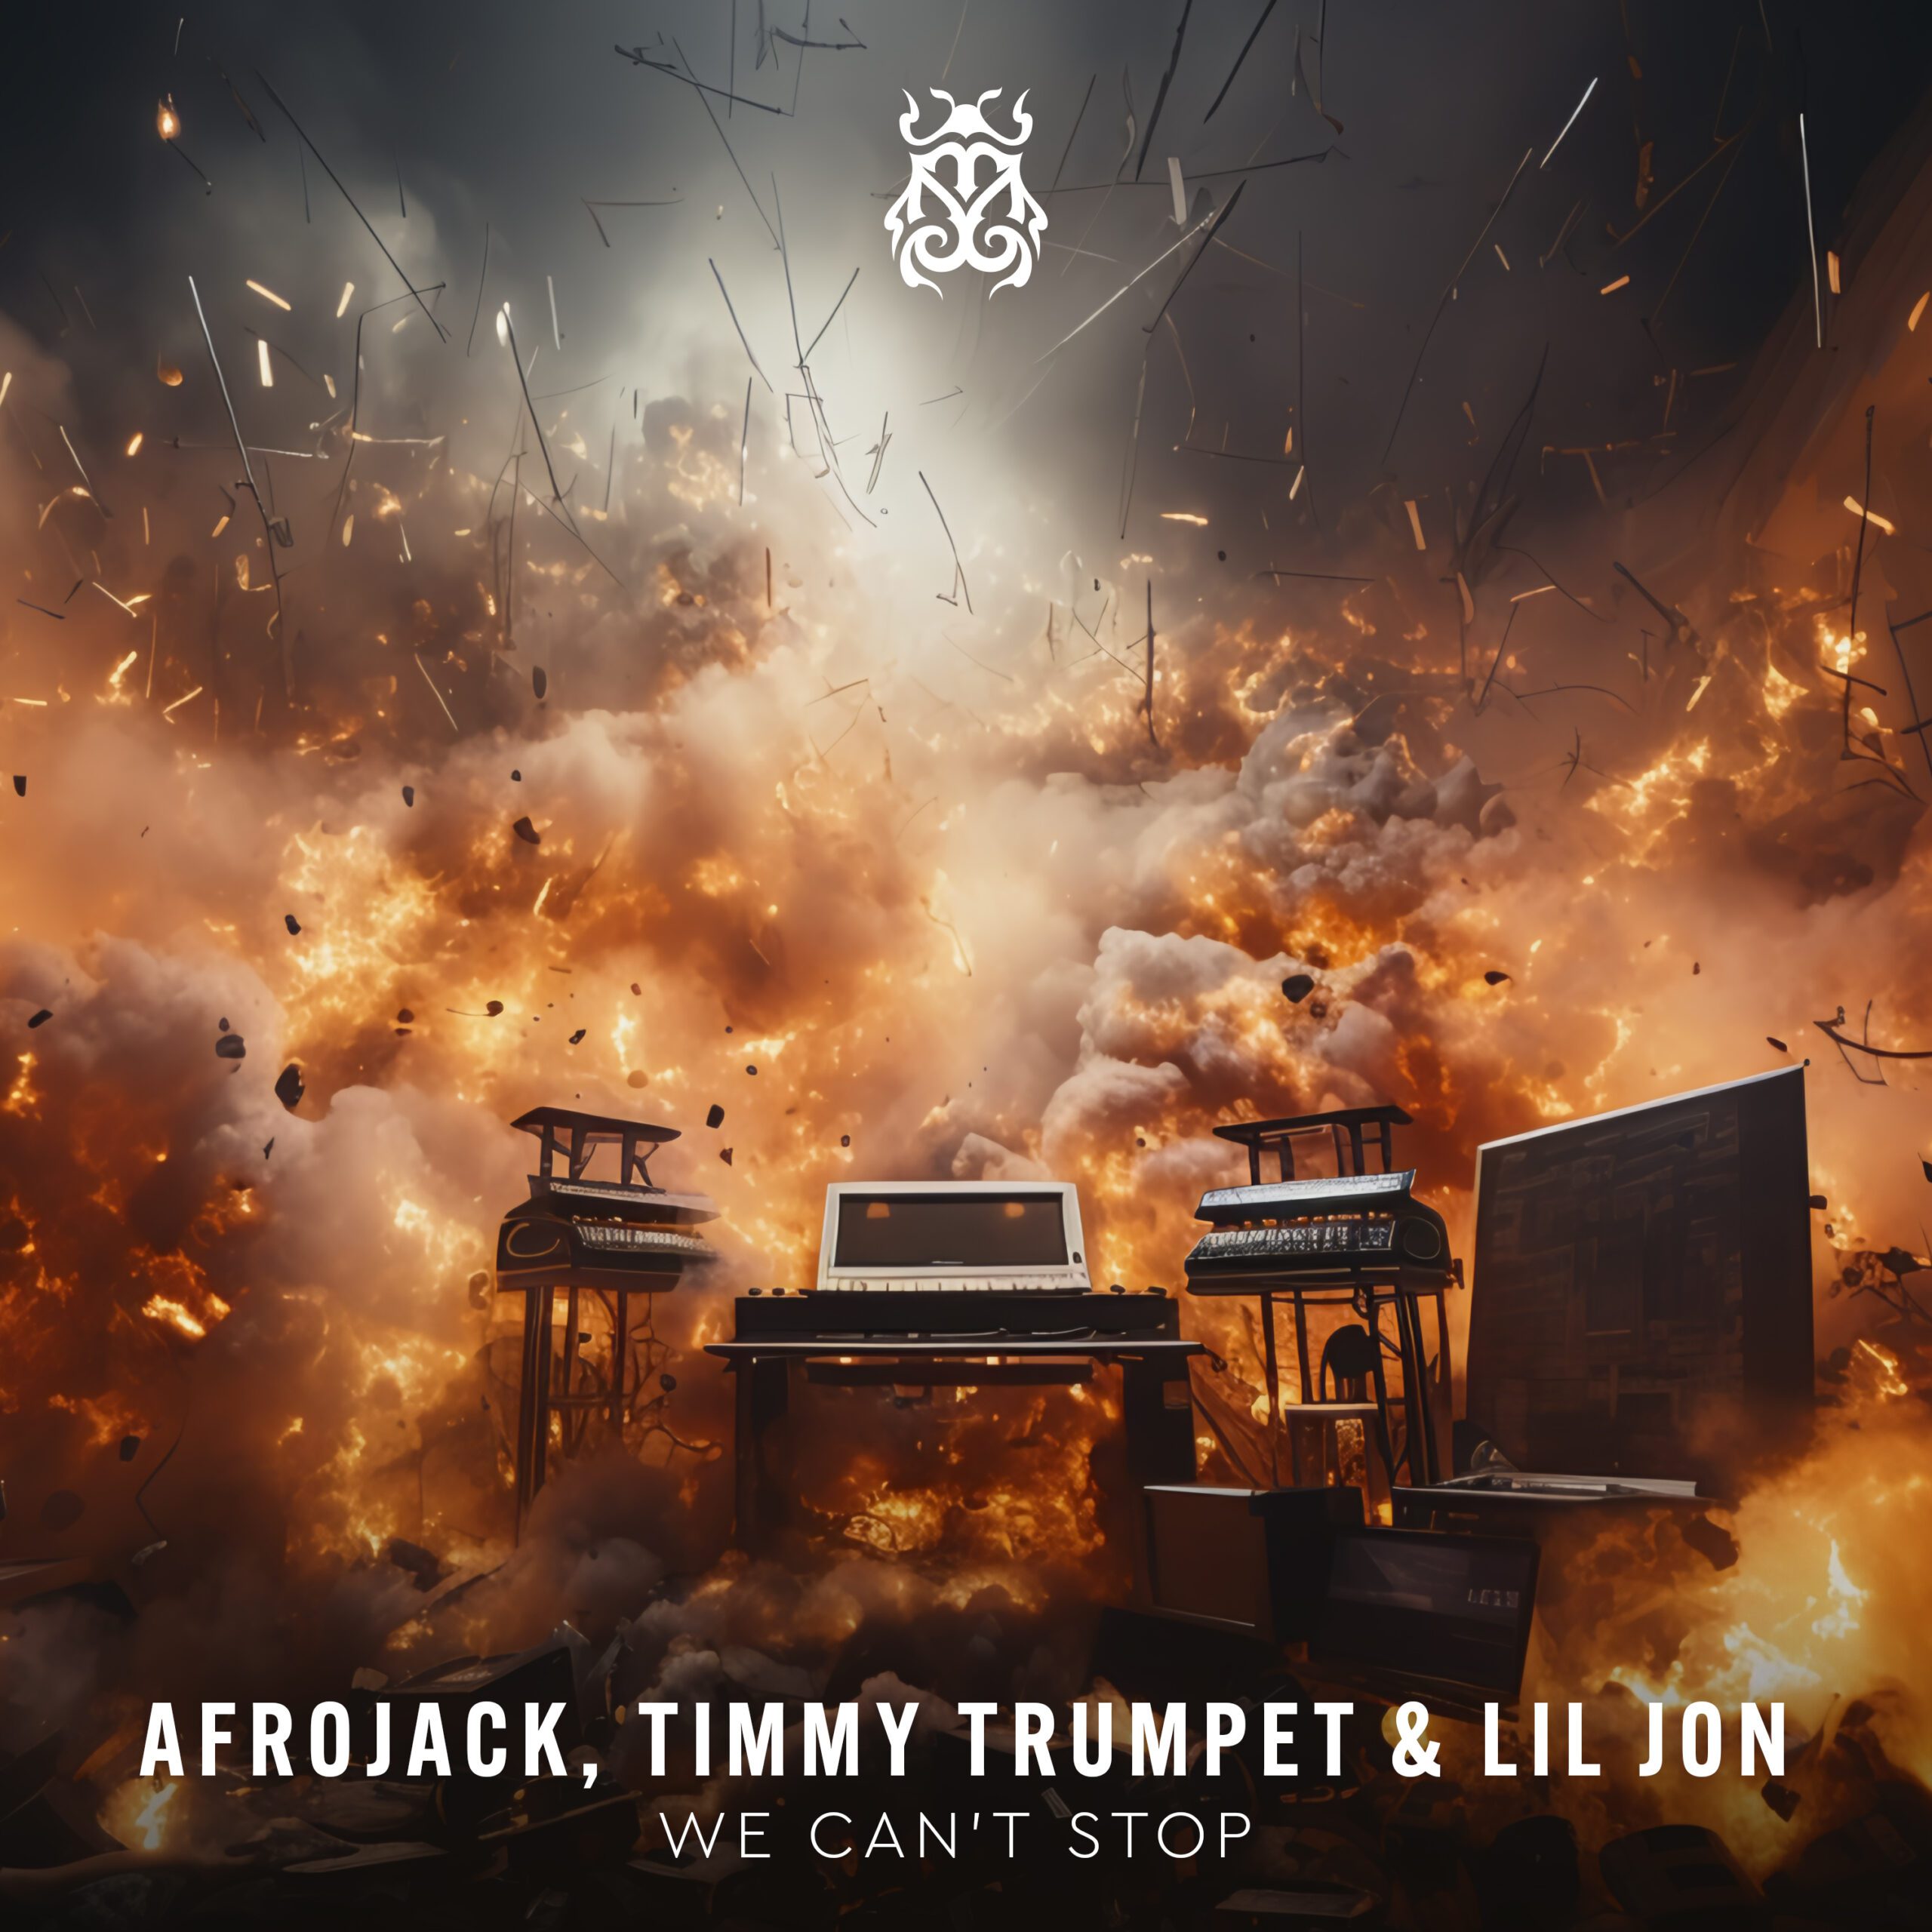 AFROJACK, Timmy Trumpet & Lil Jon – We Can’t Stop